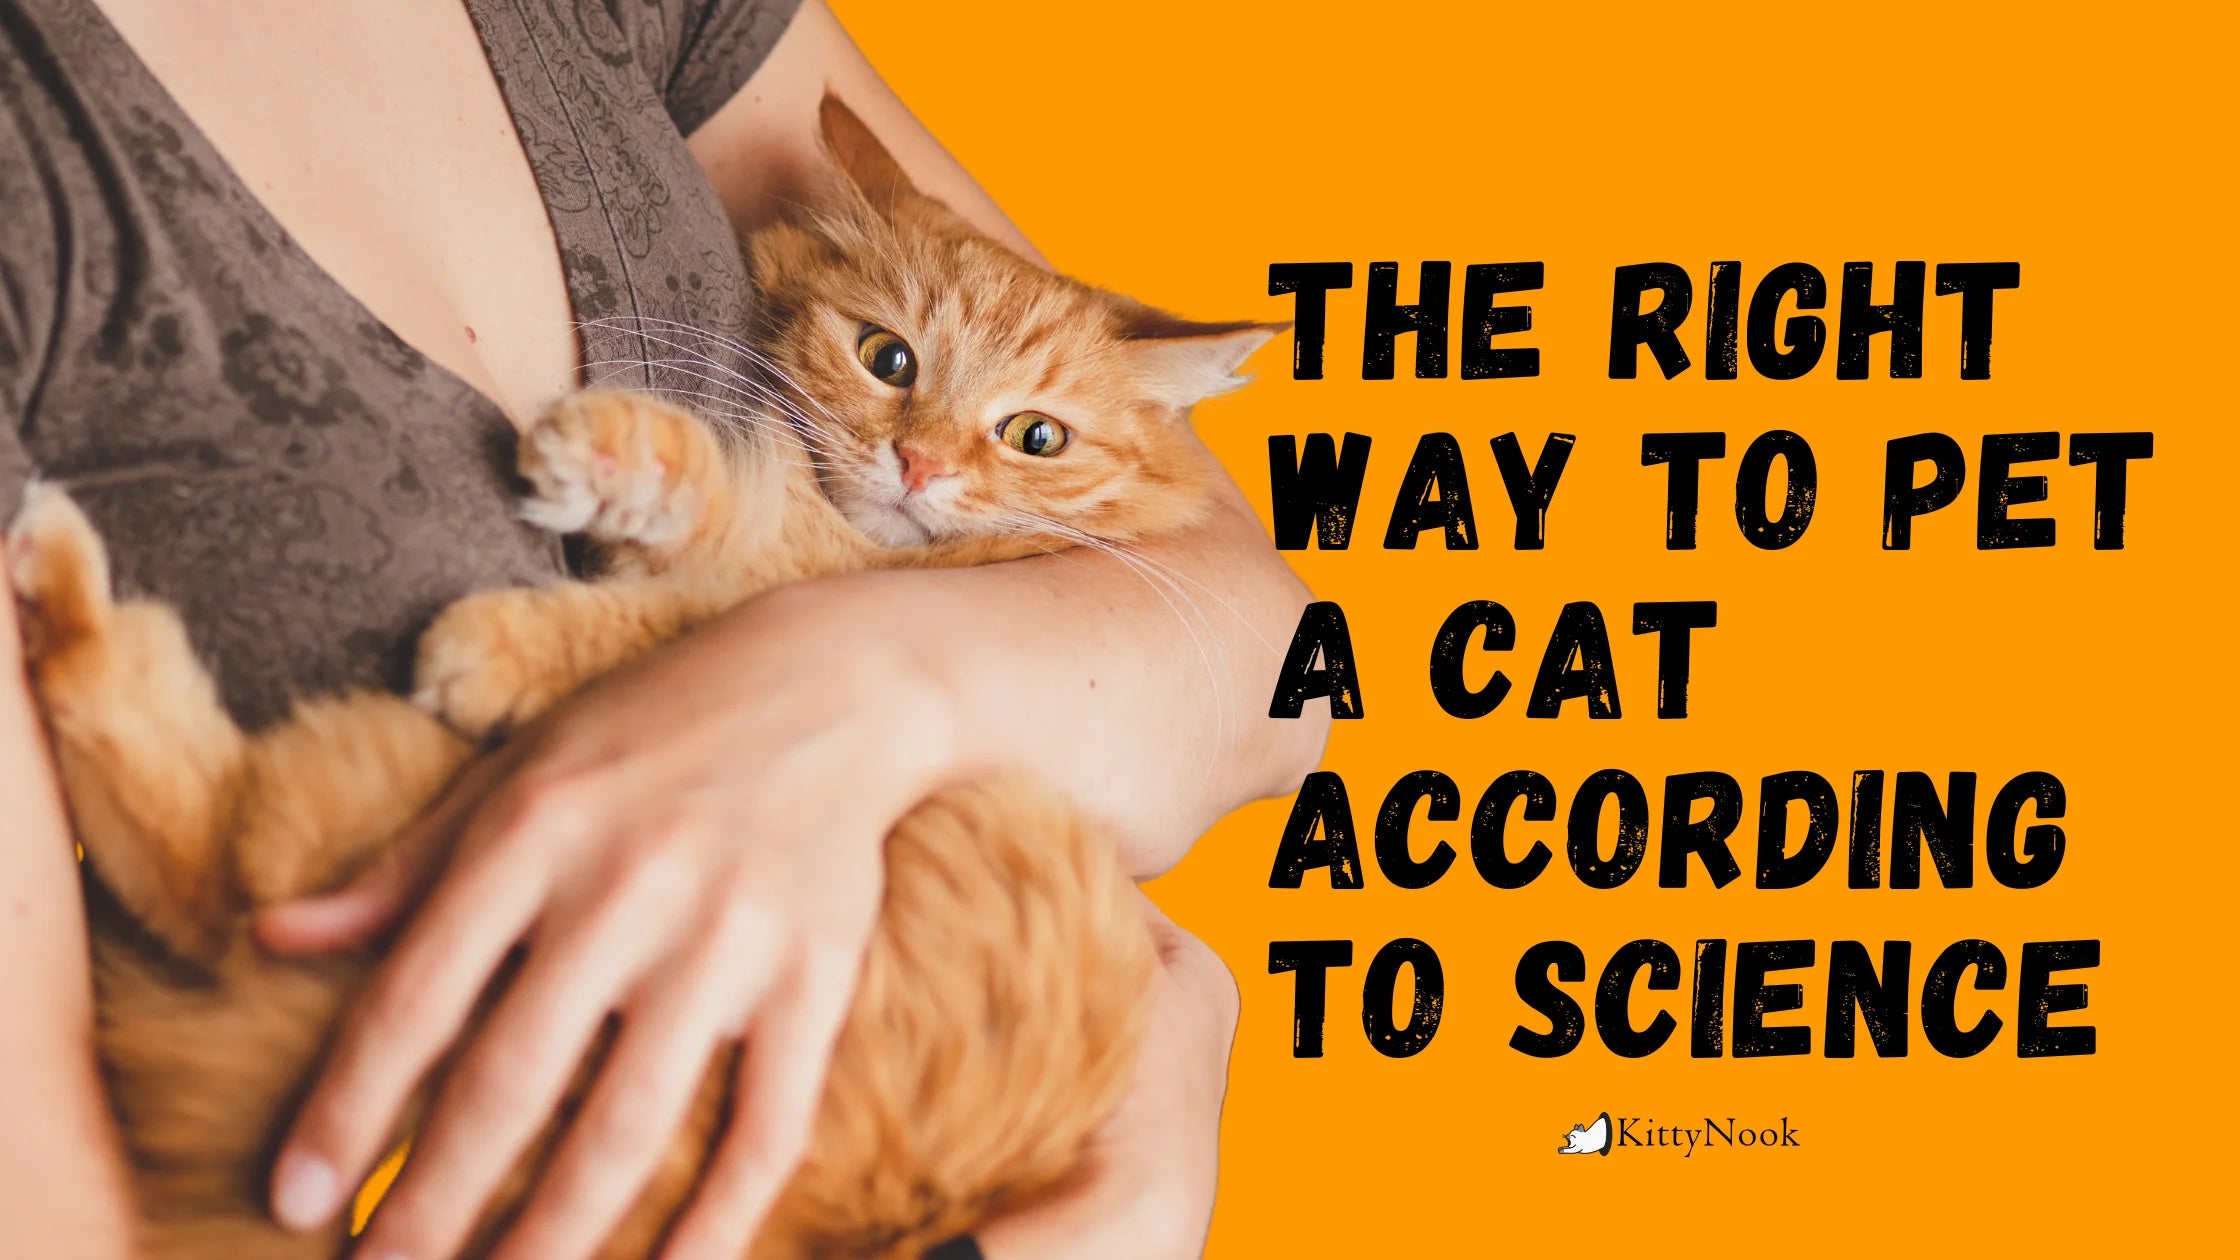 The Right Way to Pet a Cat According to Science - KittyNook Cat Company